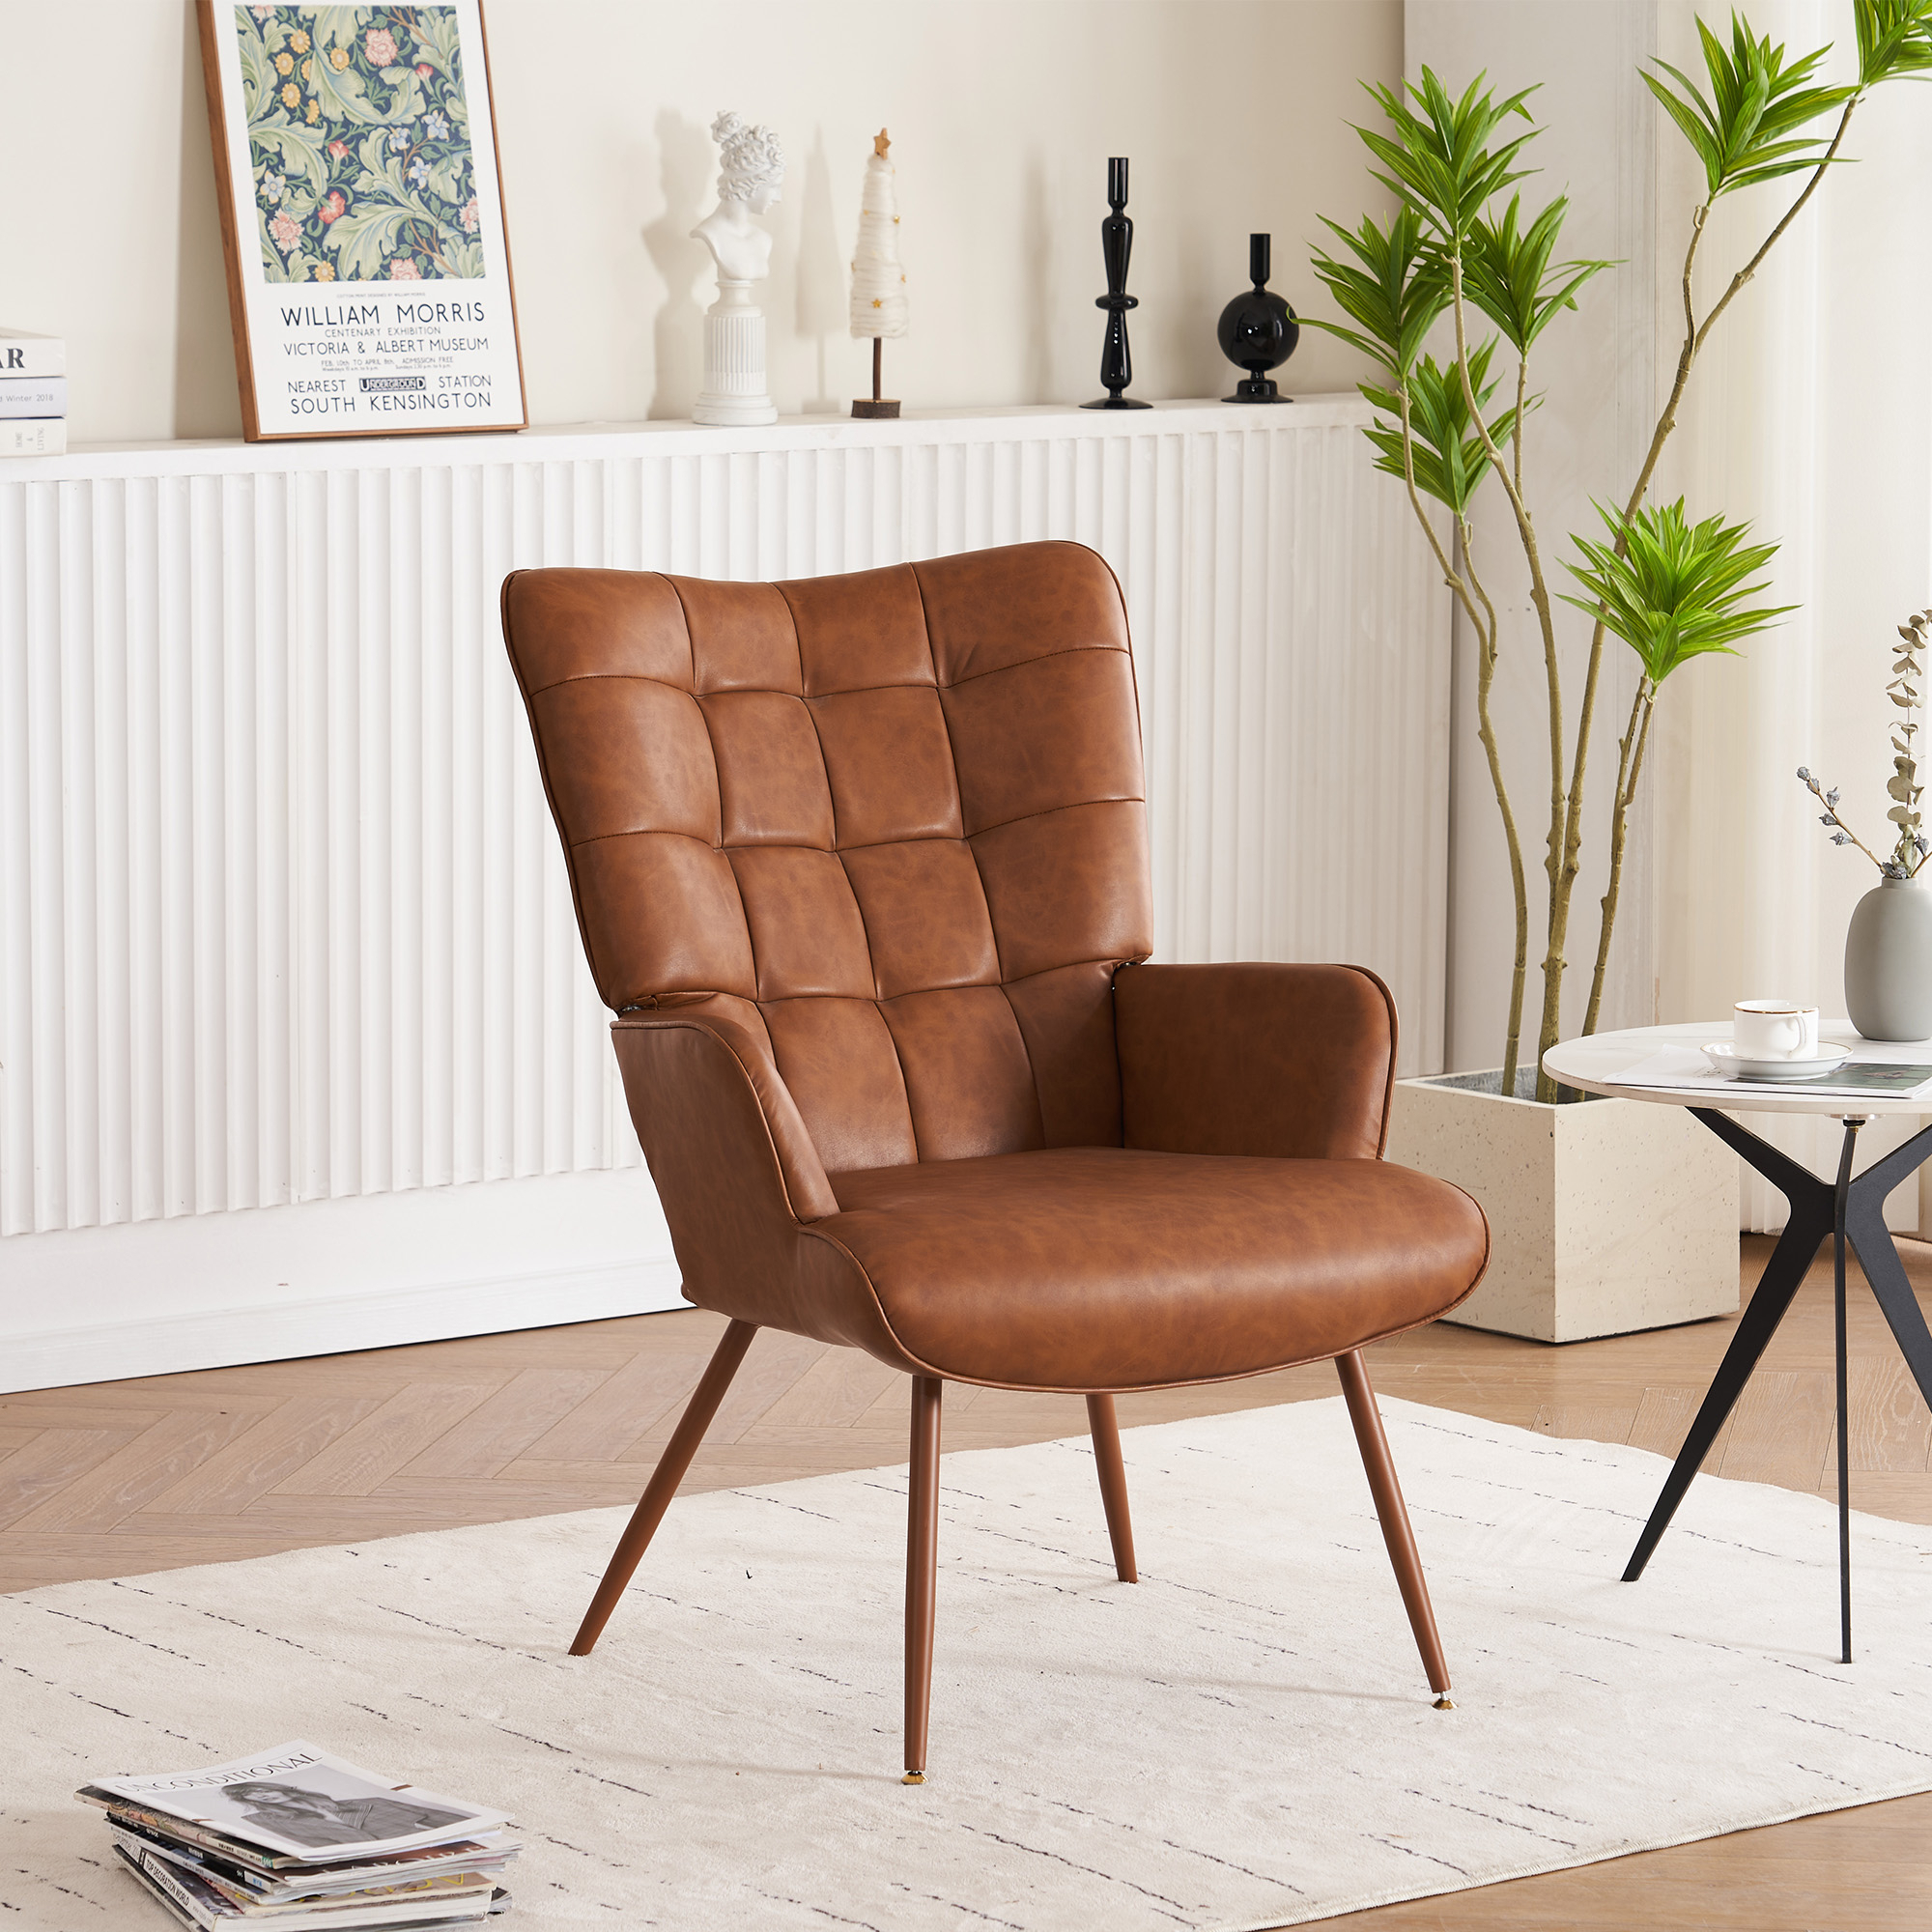 Stylish Contemporary Faux Leather Accent Chair - Perfect For Living Room Decor - Brown